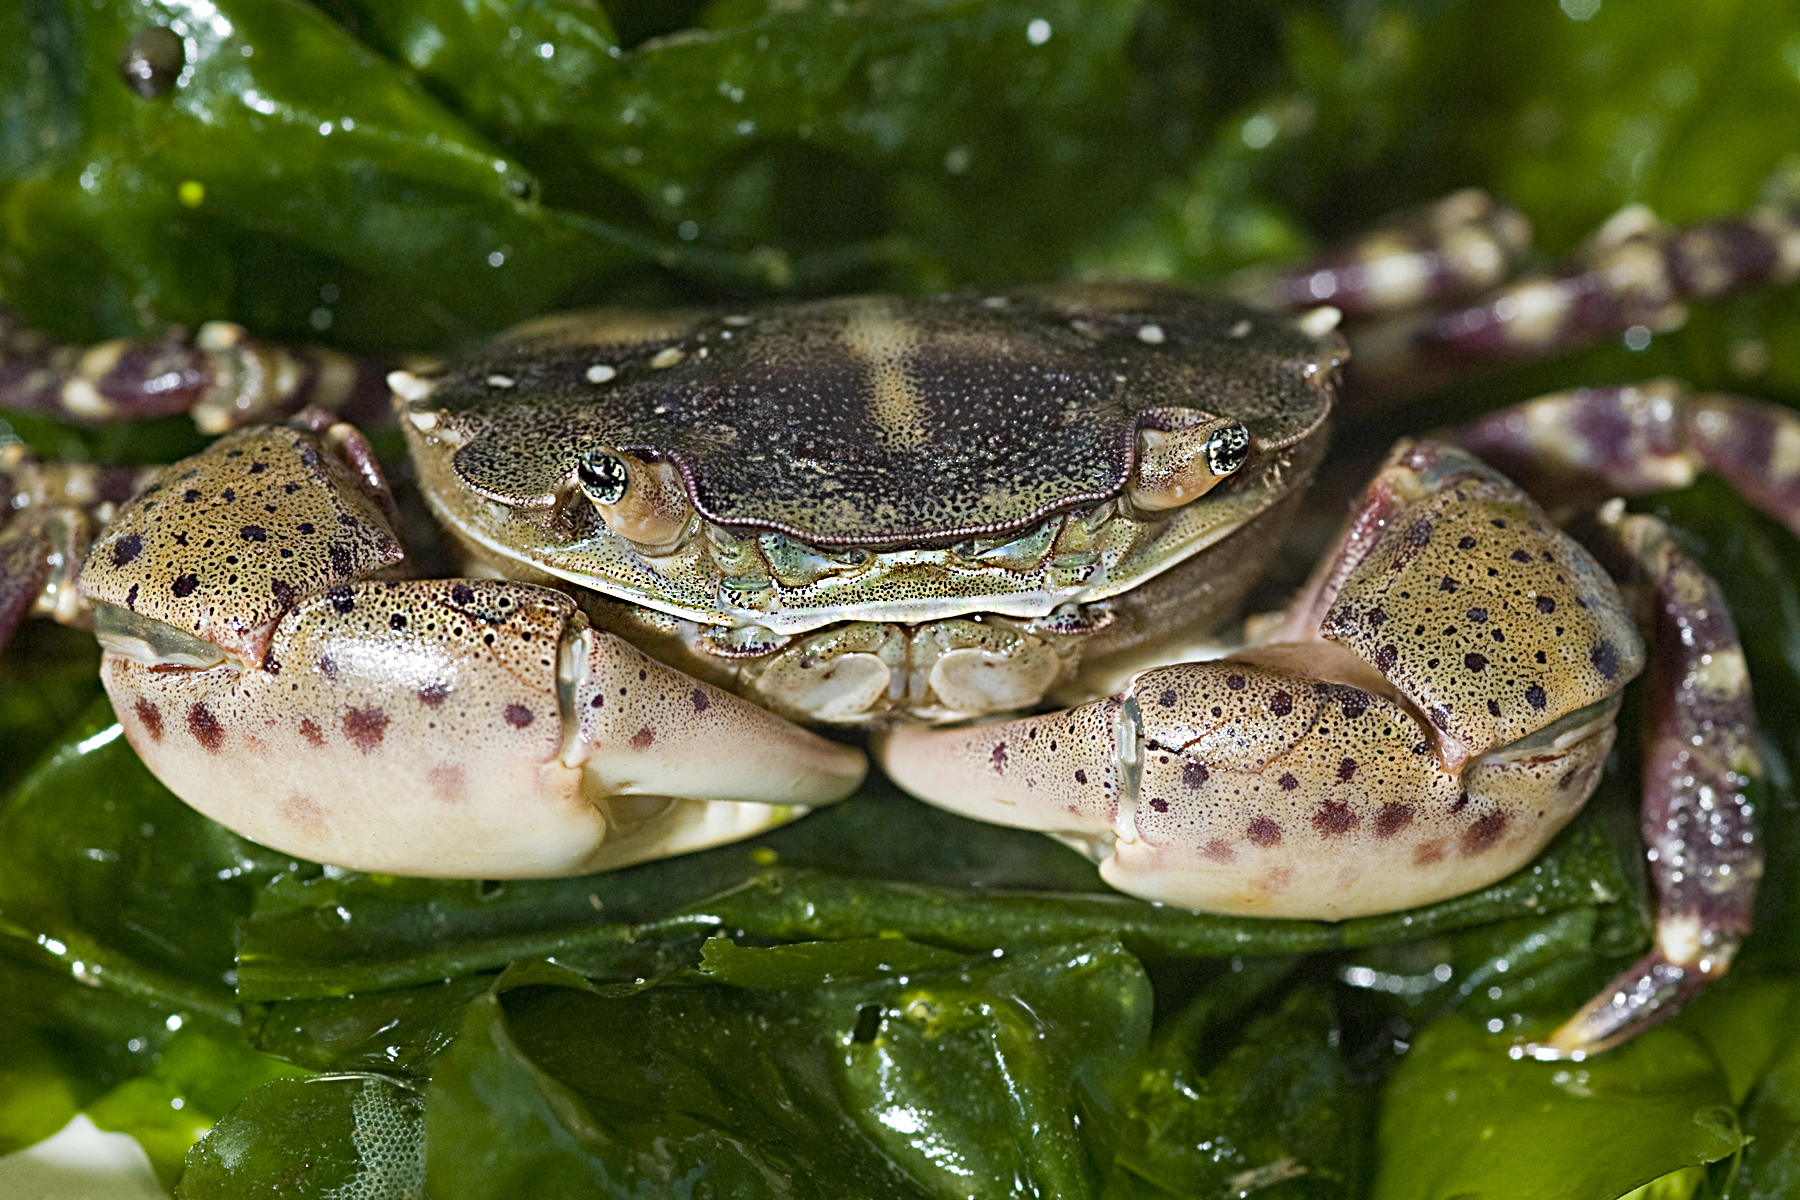 The Asian shore crab as an example of invasive species successfully spreading to the North Sea and Baltic - Photo: Alfred Wegener Institute / Uwe Nettelmann